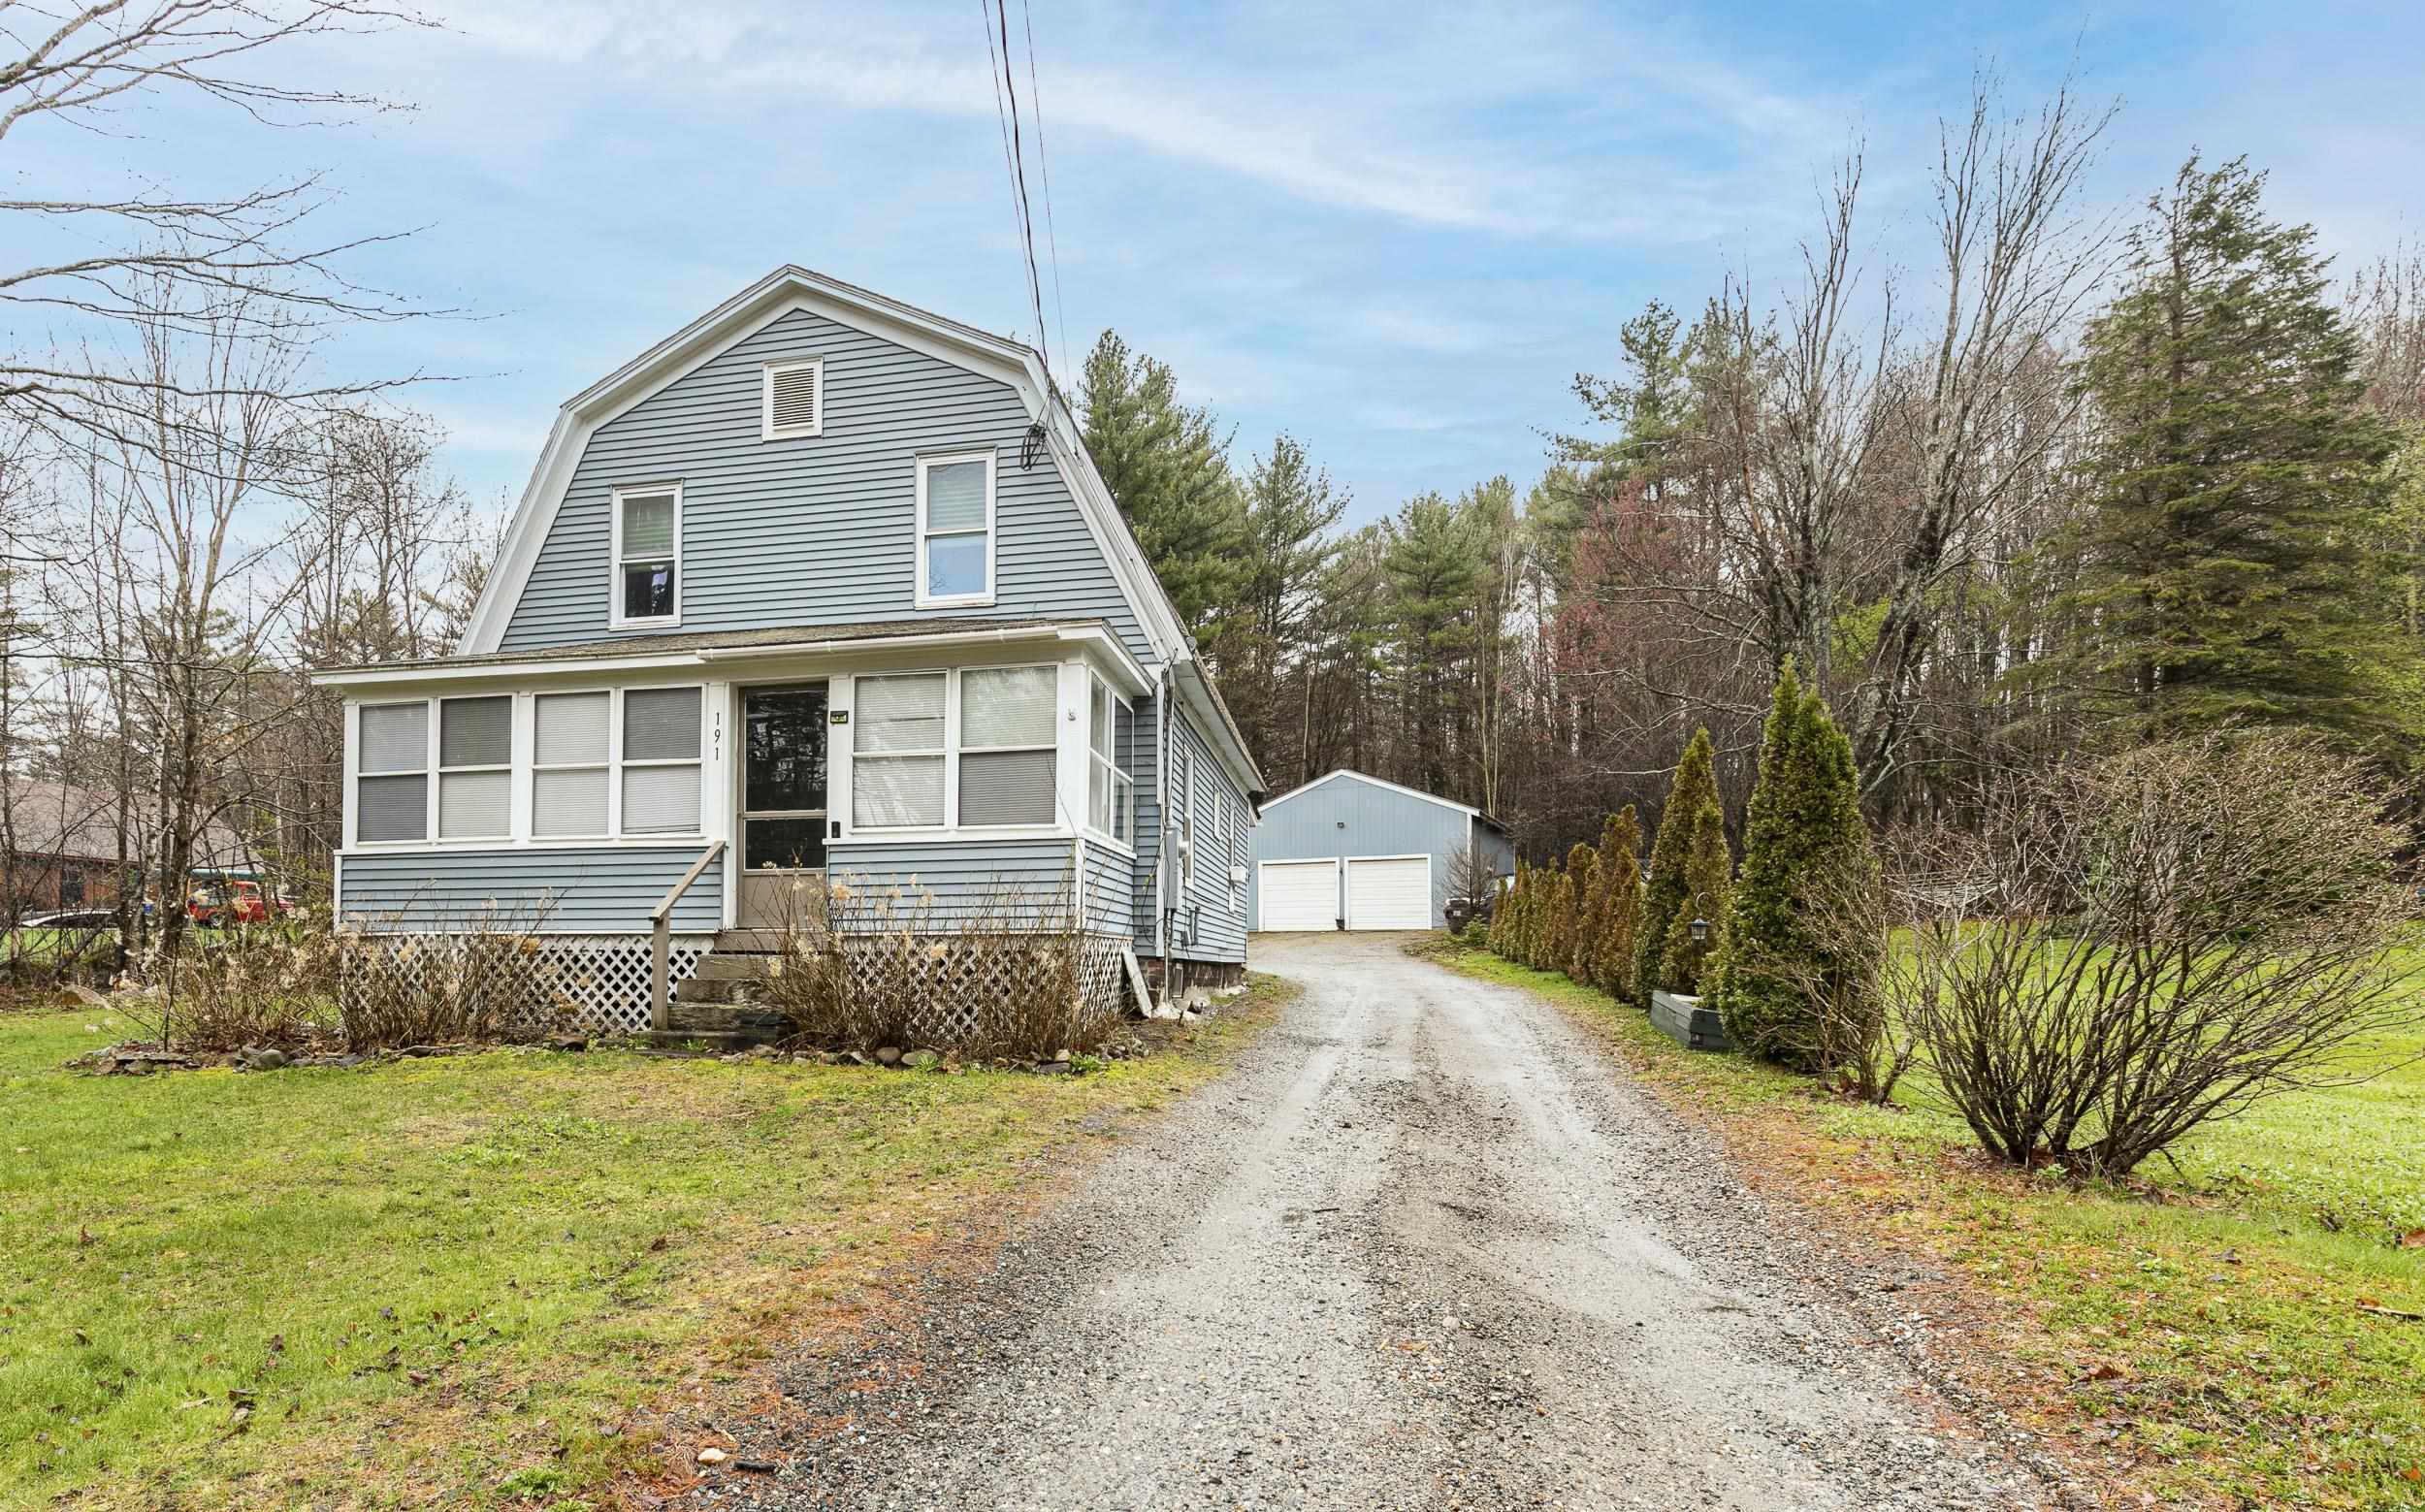 Newport NH 03773 Home for sale $List Price is $299,000